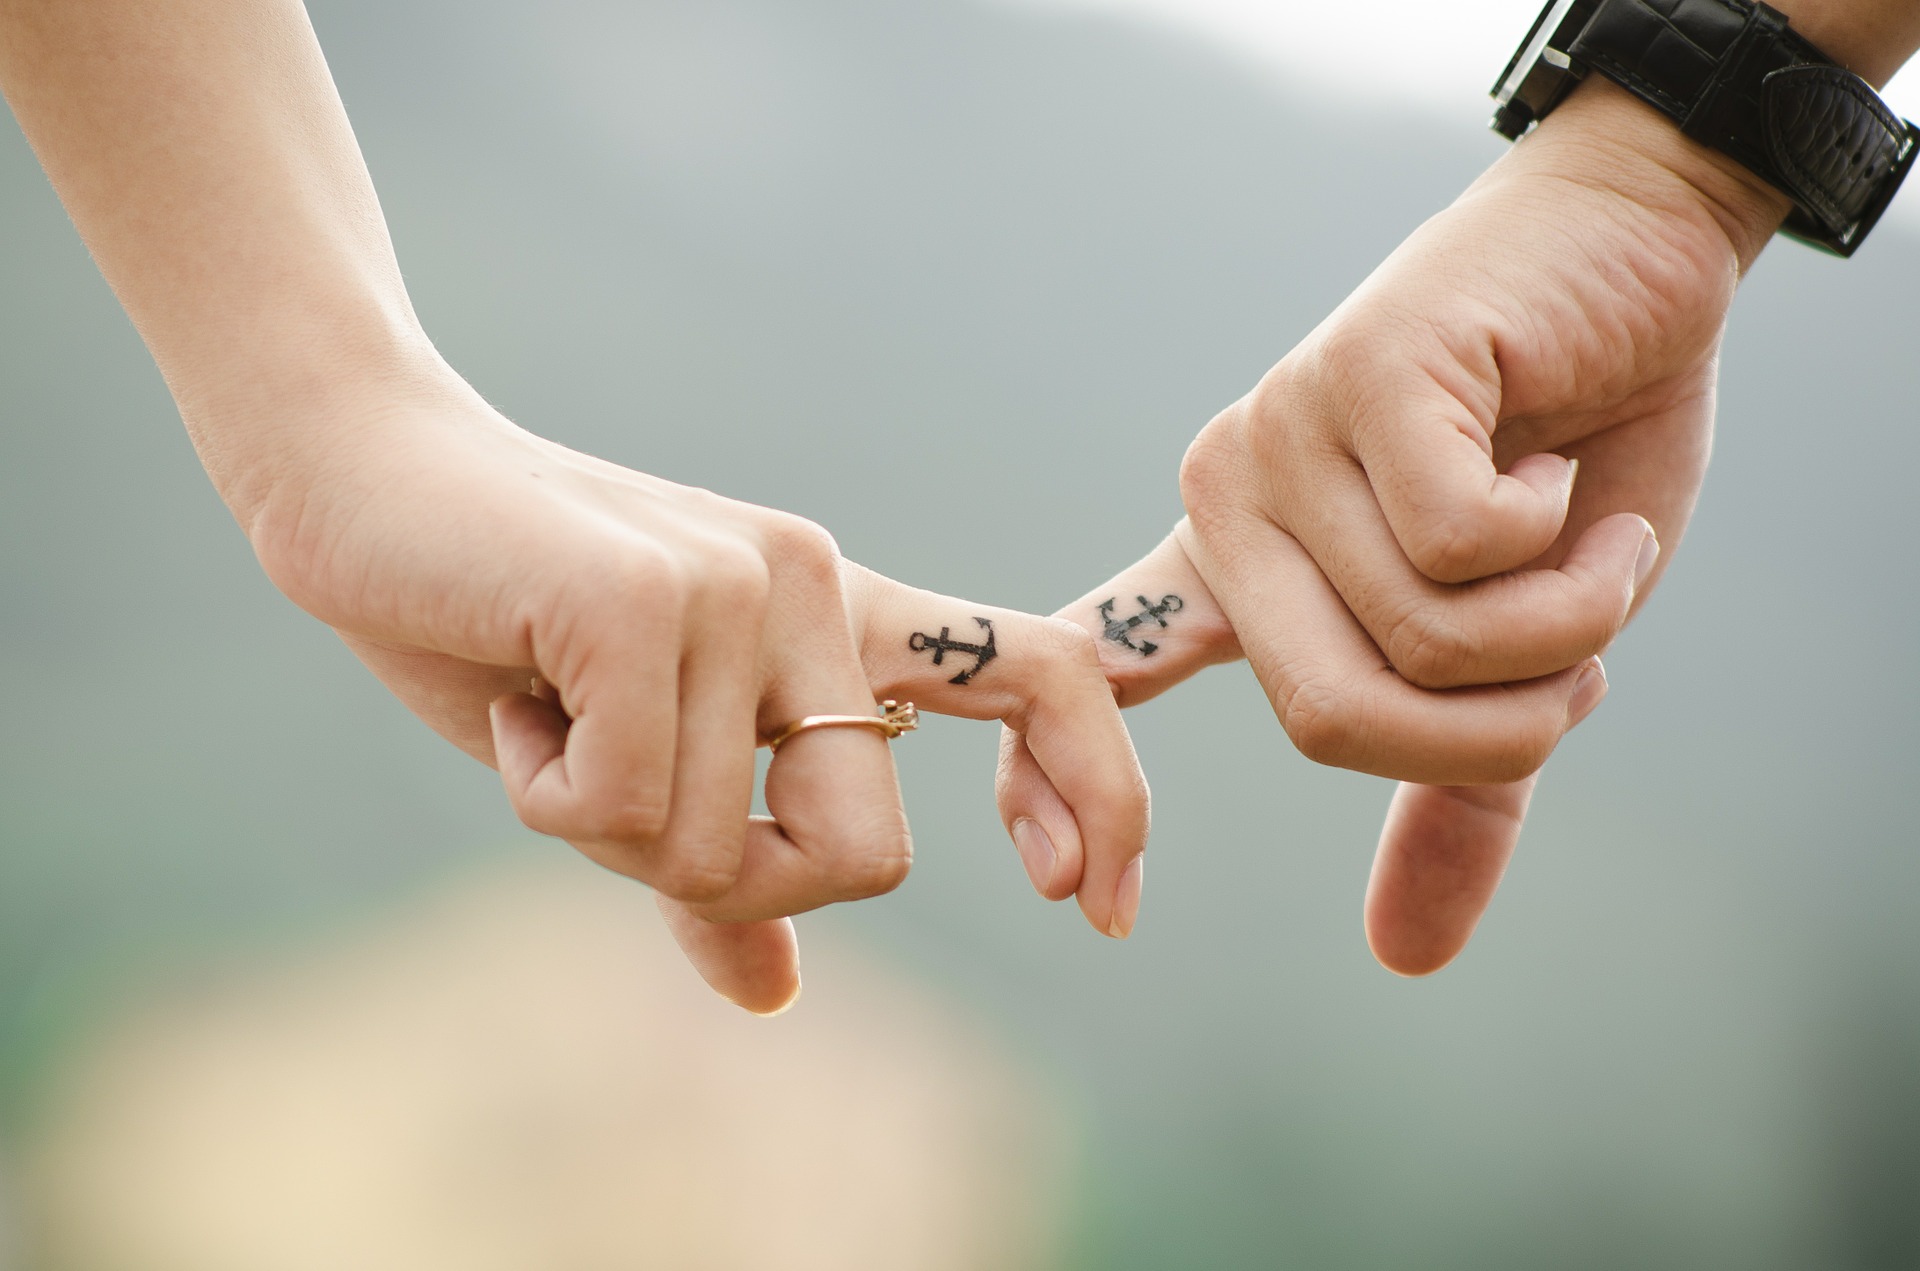 Seaman and girlfriend holding hands with anchor tattoos on their fingers